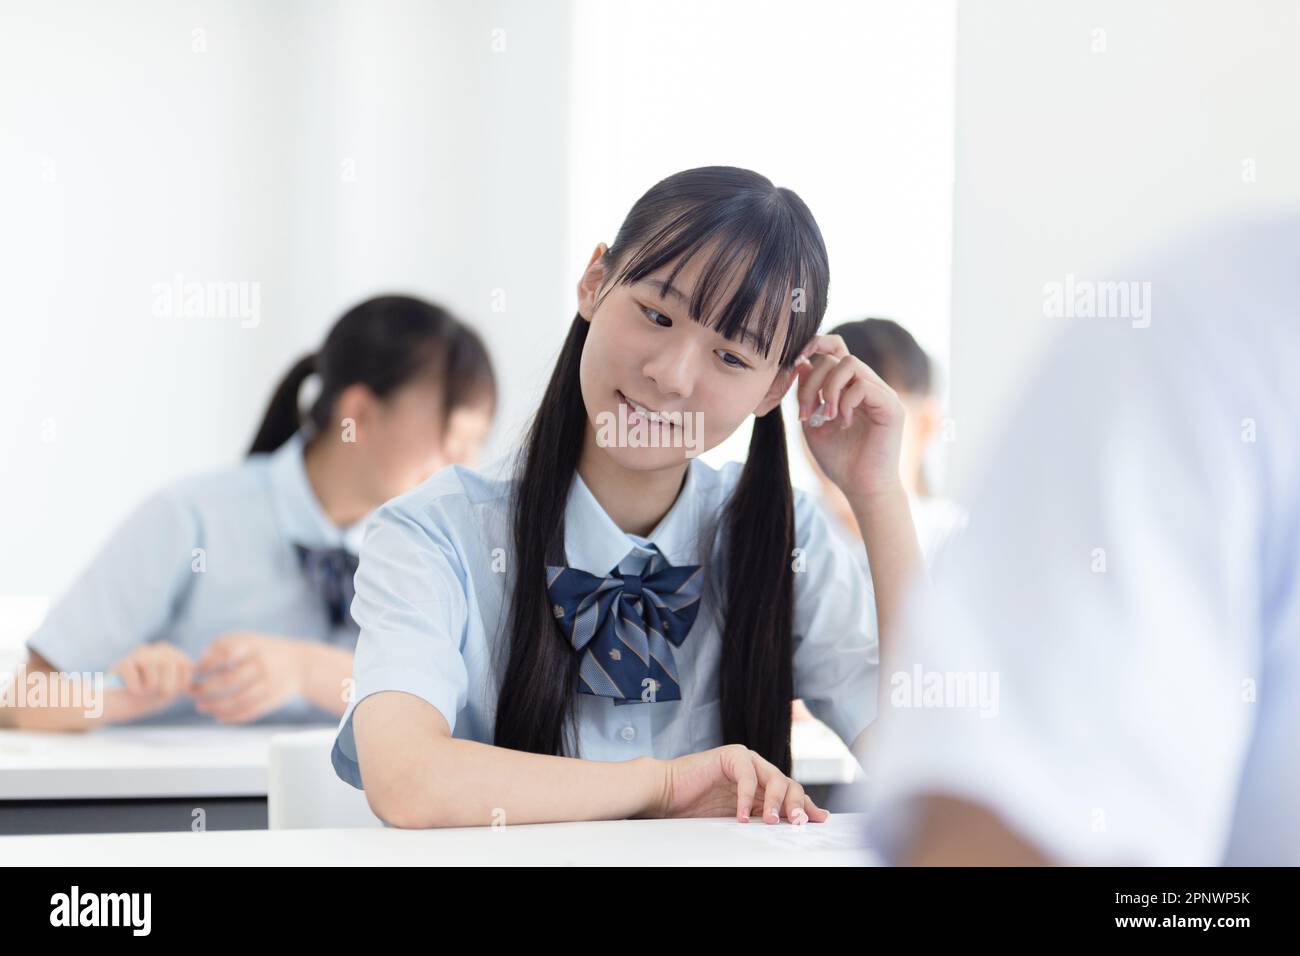 High school students taking a class Stock Photo